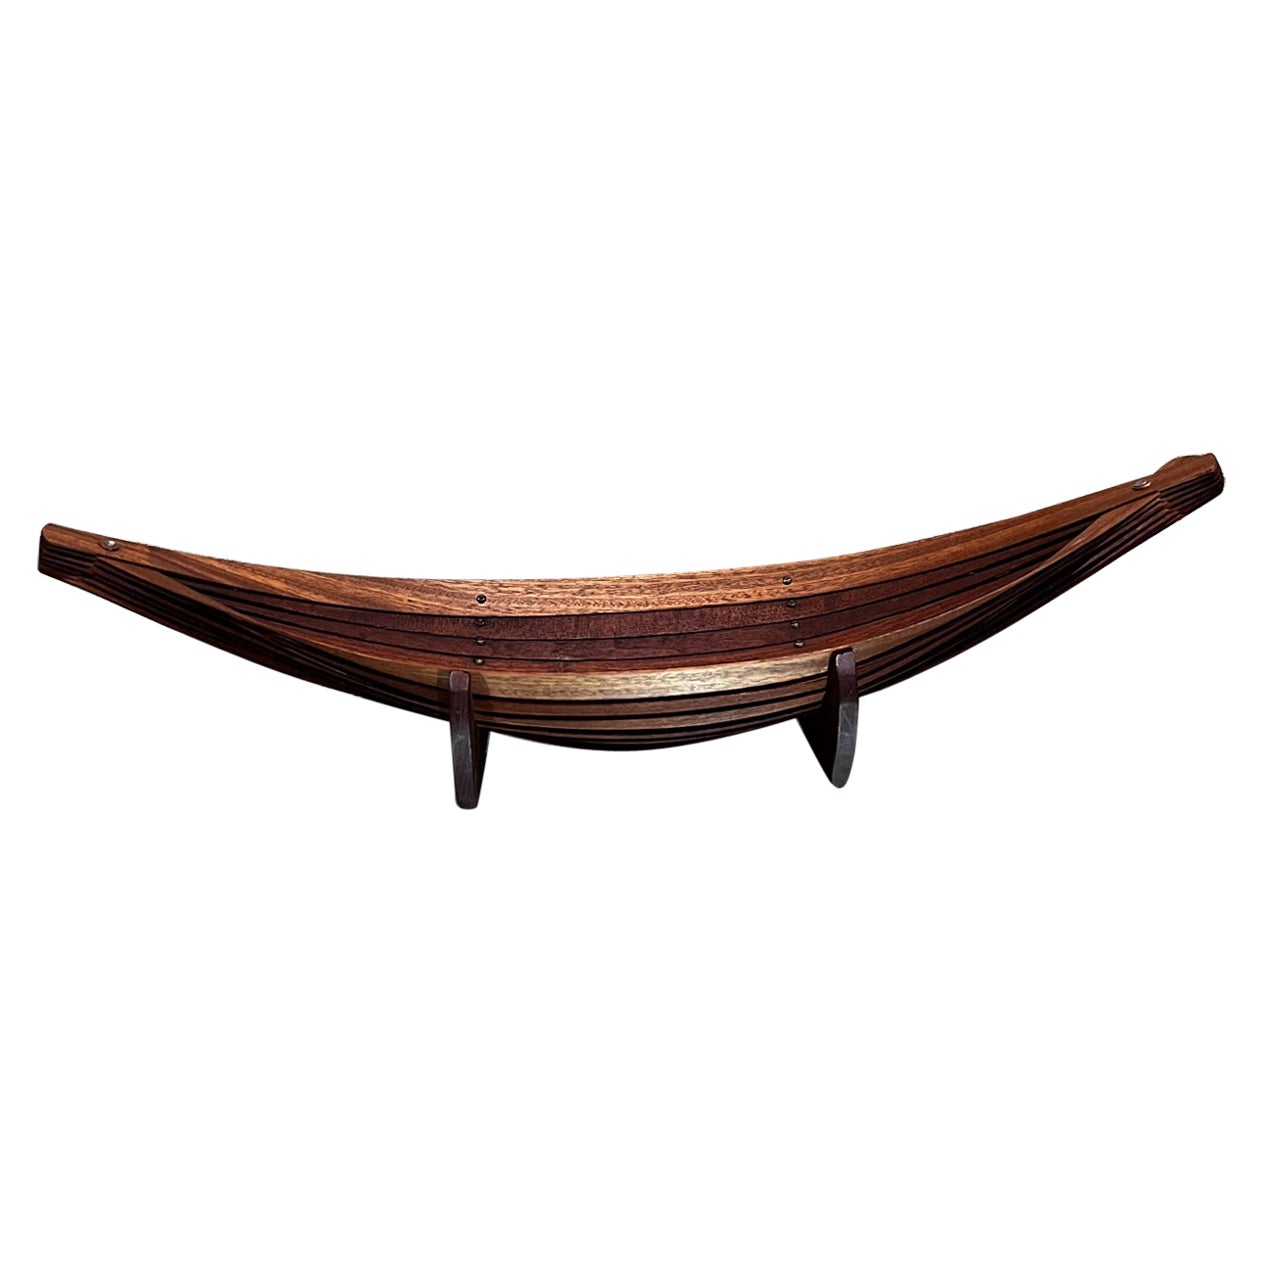 1970s Sculptural Modern Mahogany Wood and Brass Canoe Bowl For Sale